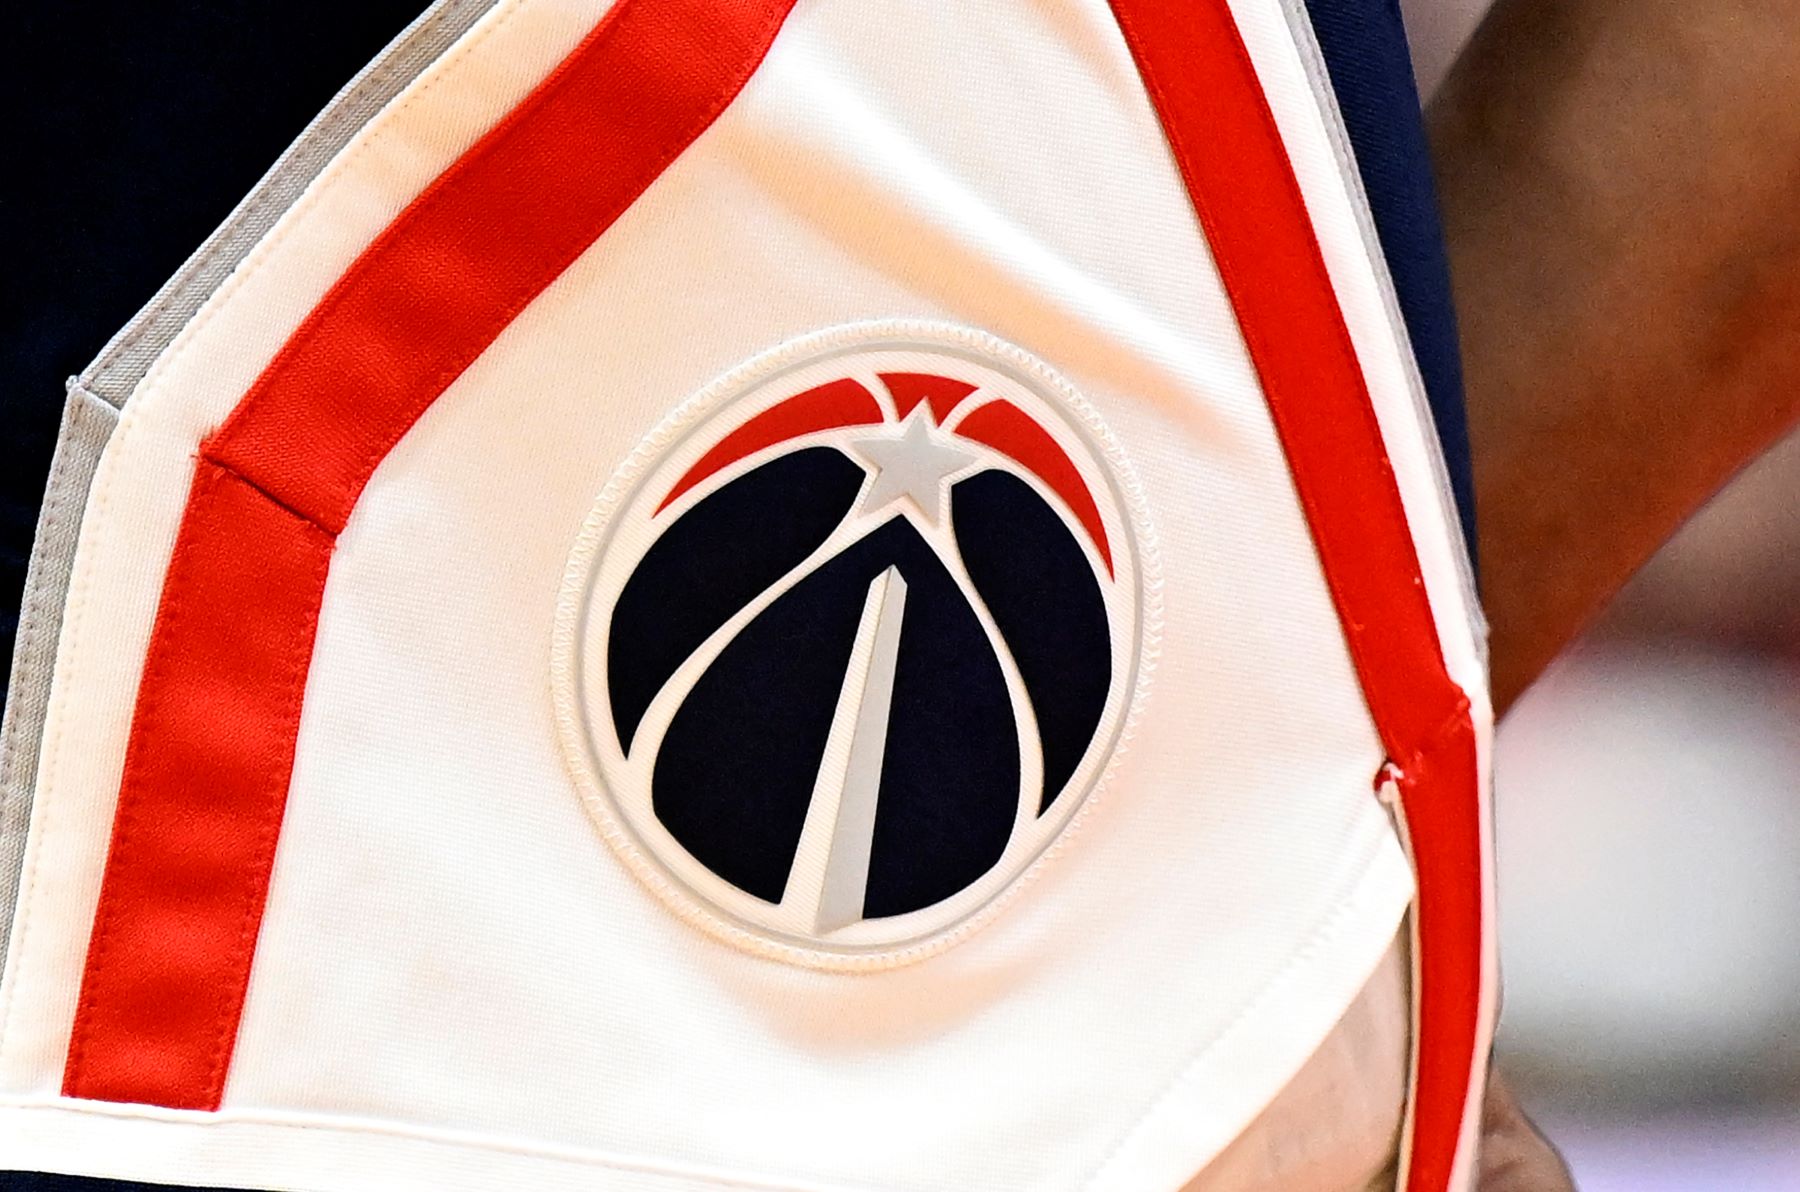 NBA team Washington Wizards logo on the uniform shorts during a game against the Chicago Bulls